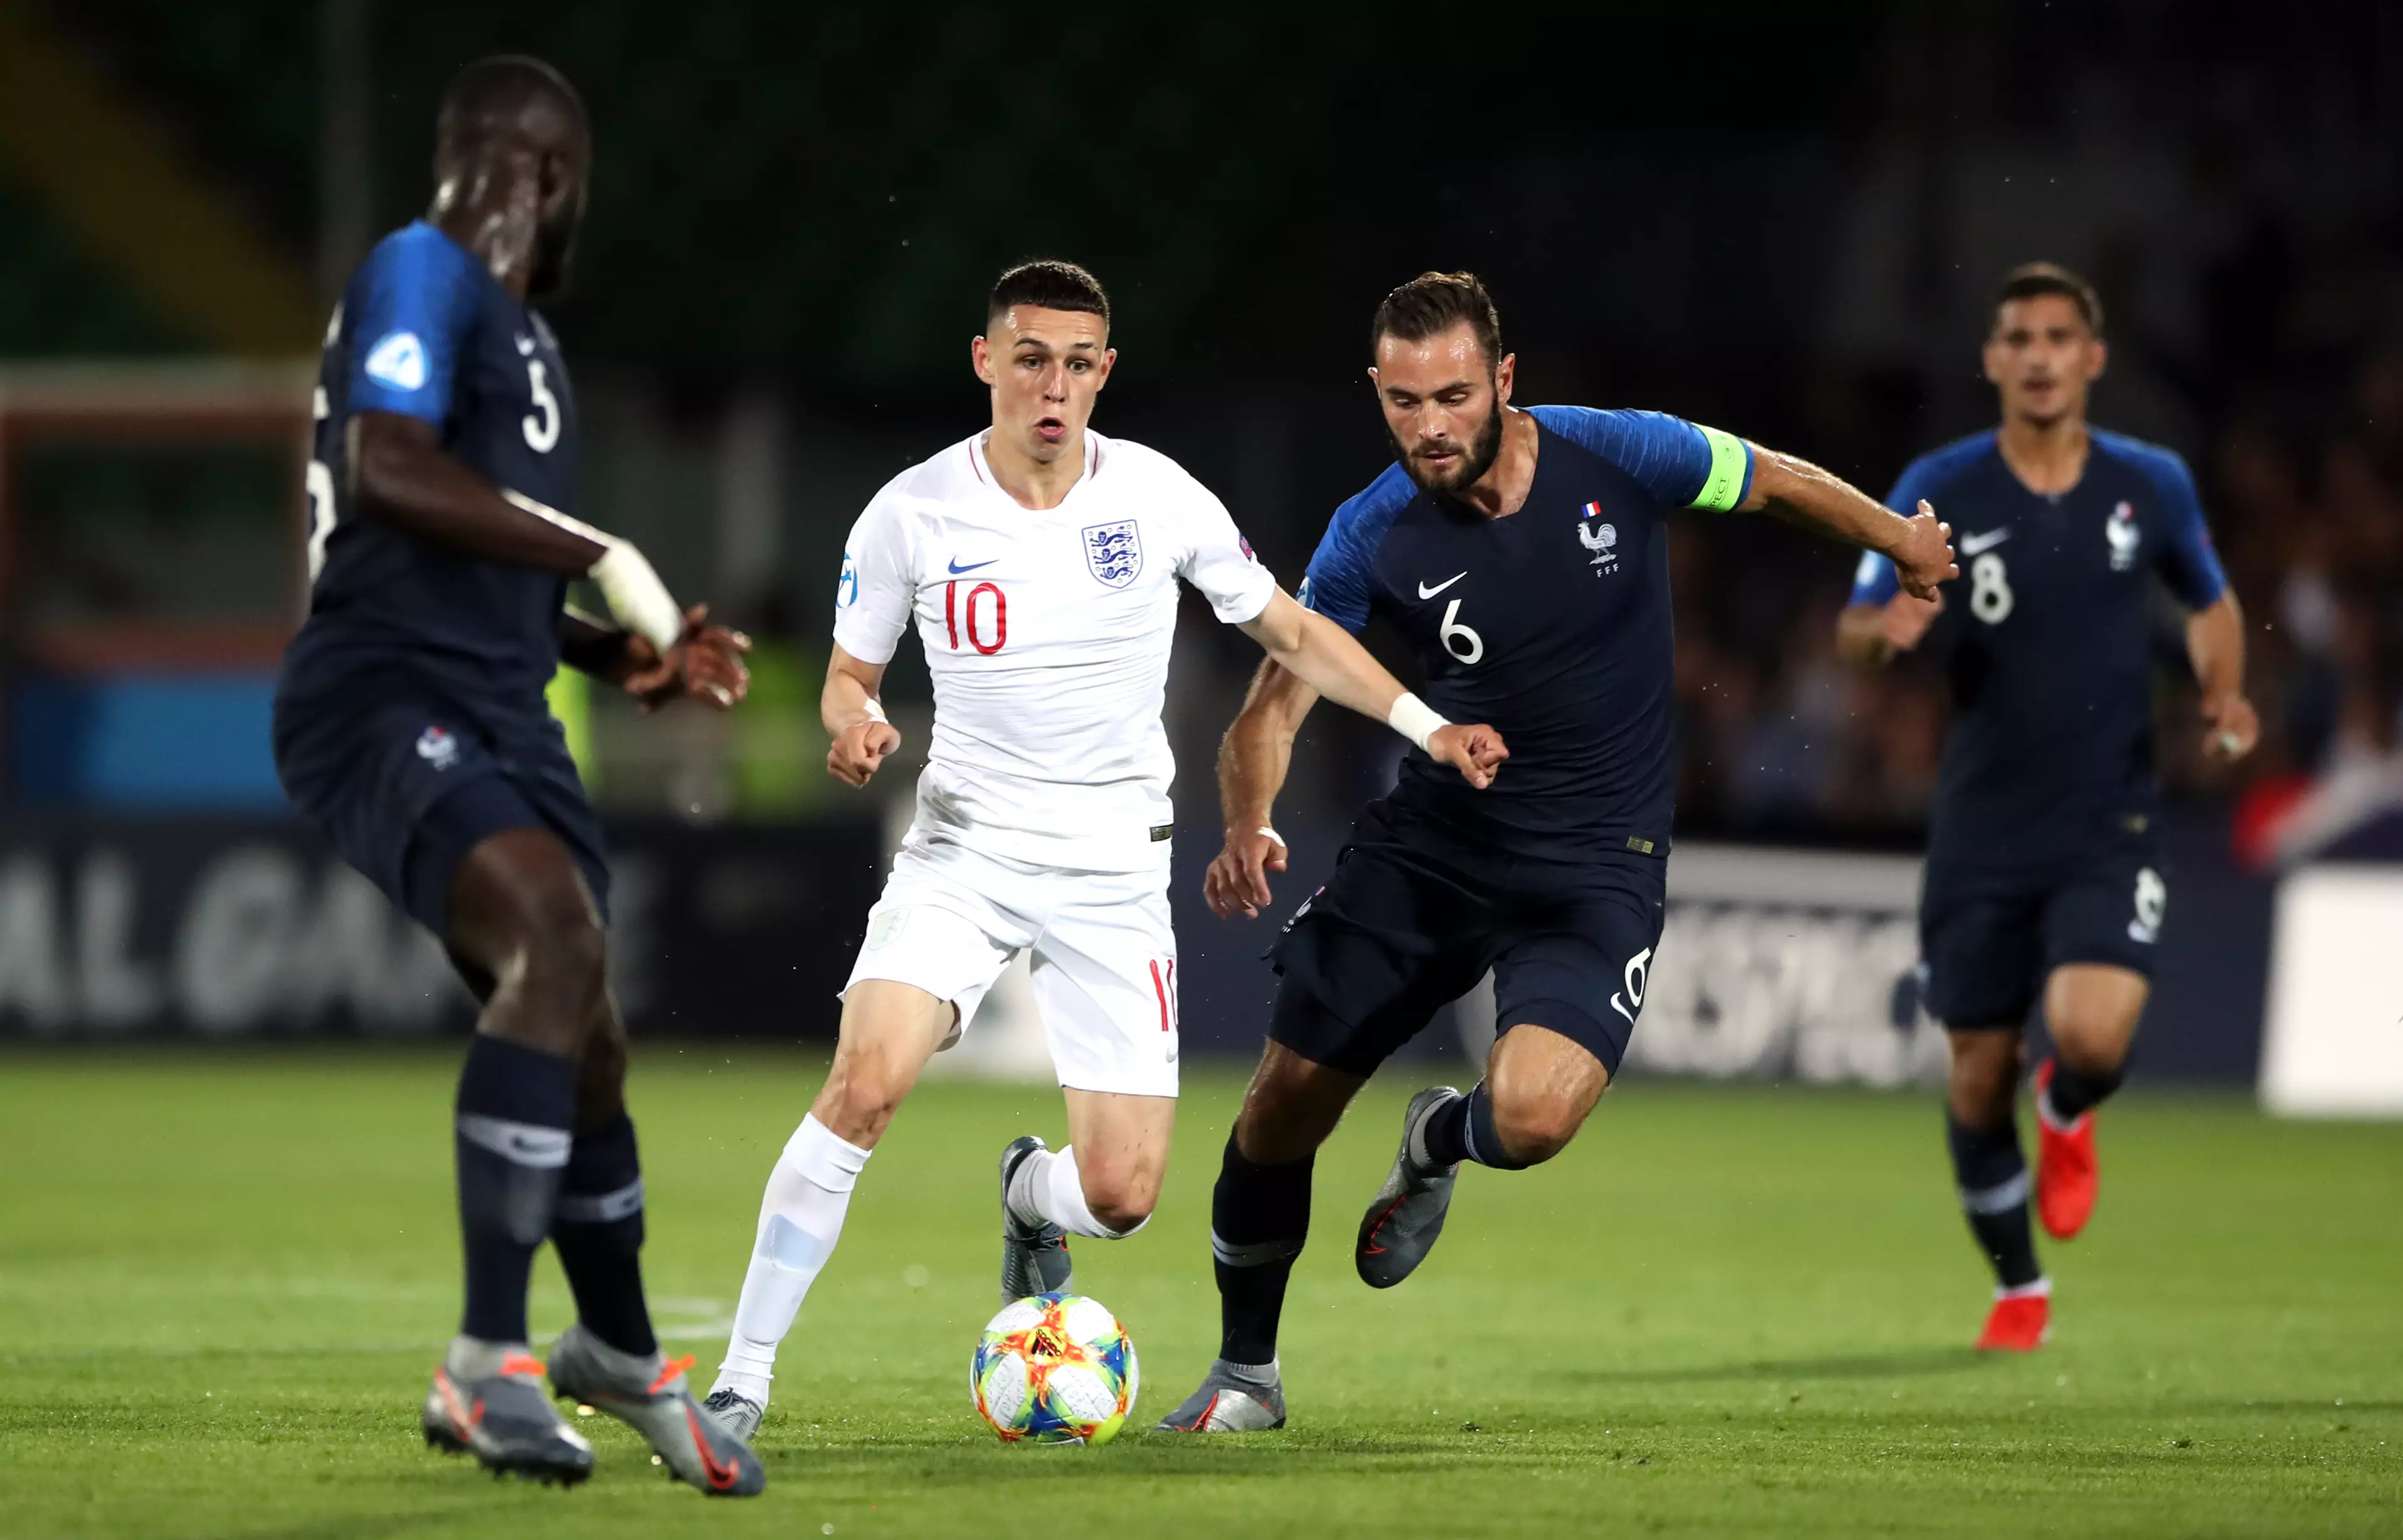 Foden impressed in Italy. Image: PA Images